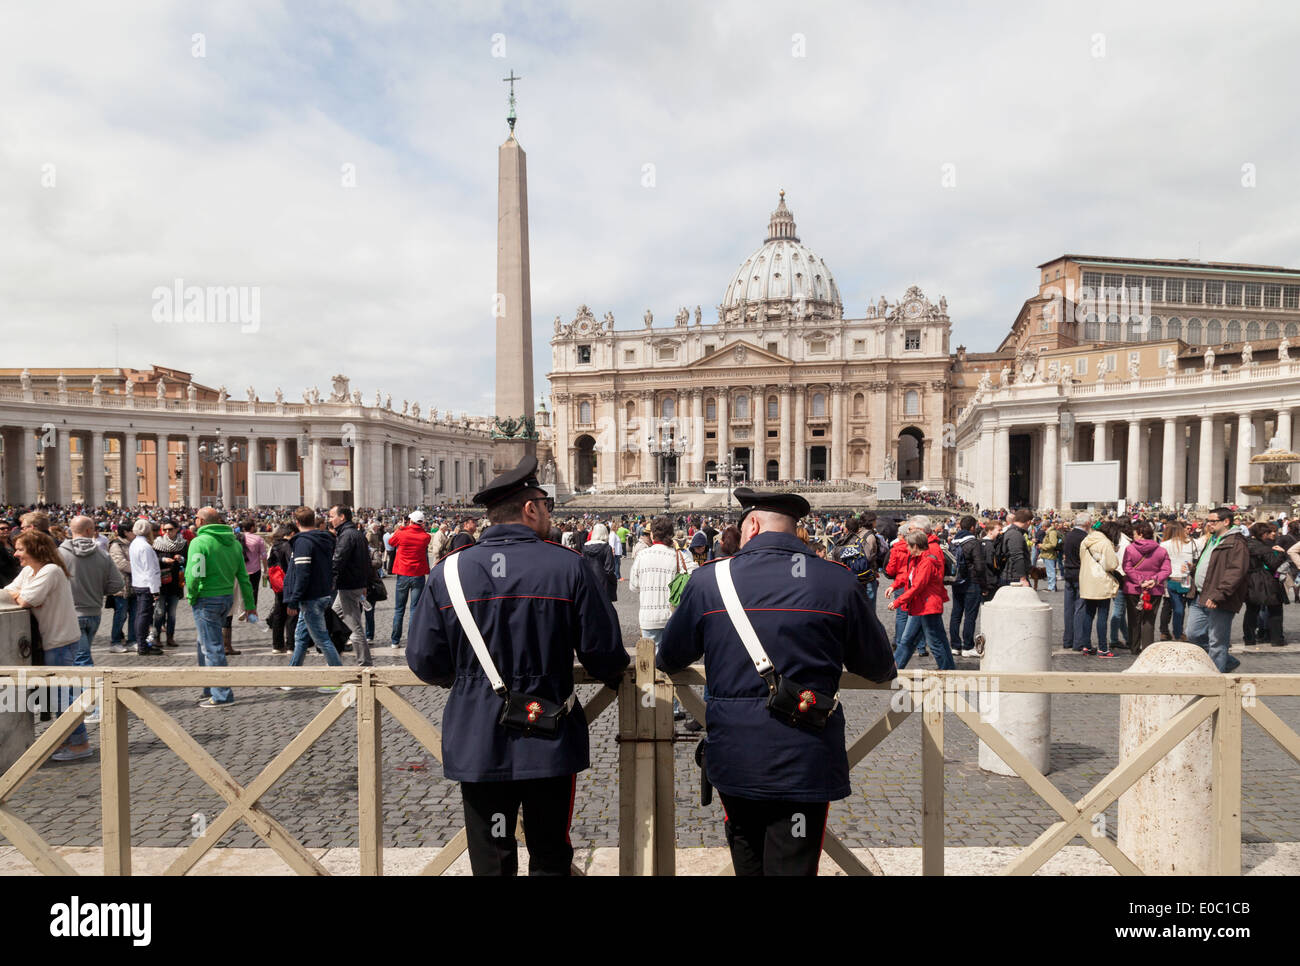 Two members of the Carabinieri or Italian Military Police at the entrance to the Vatican City, Rome Italy Stock Photo